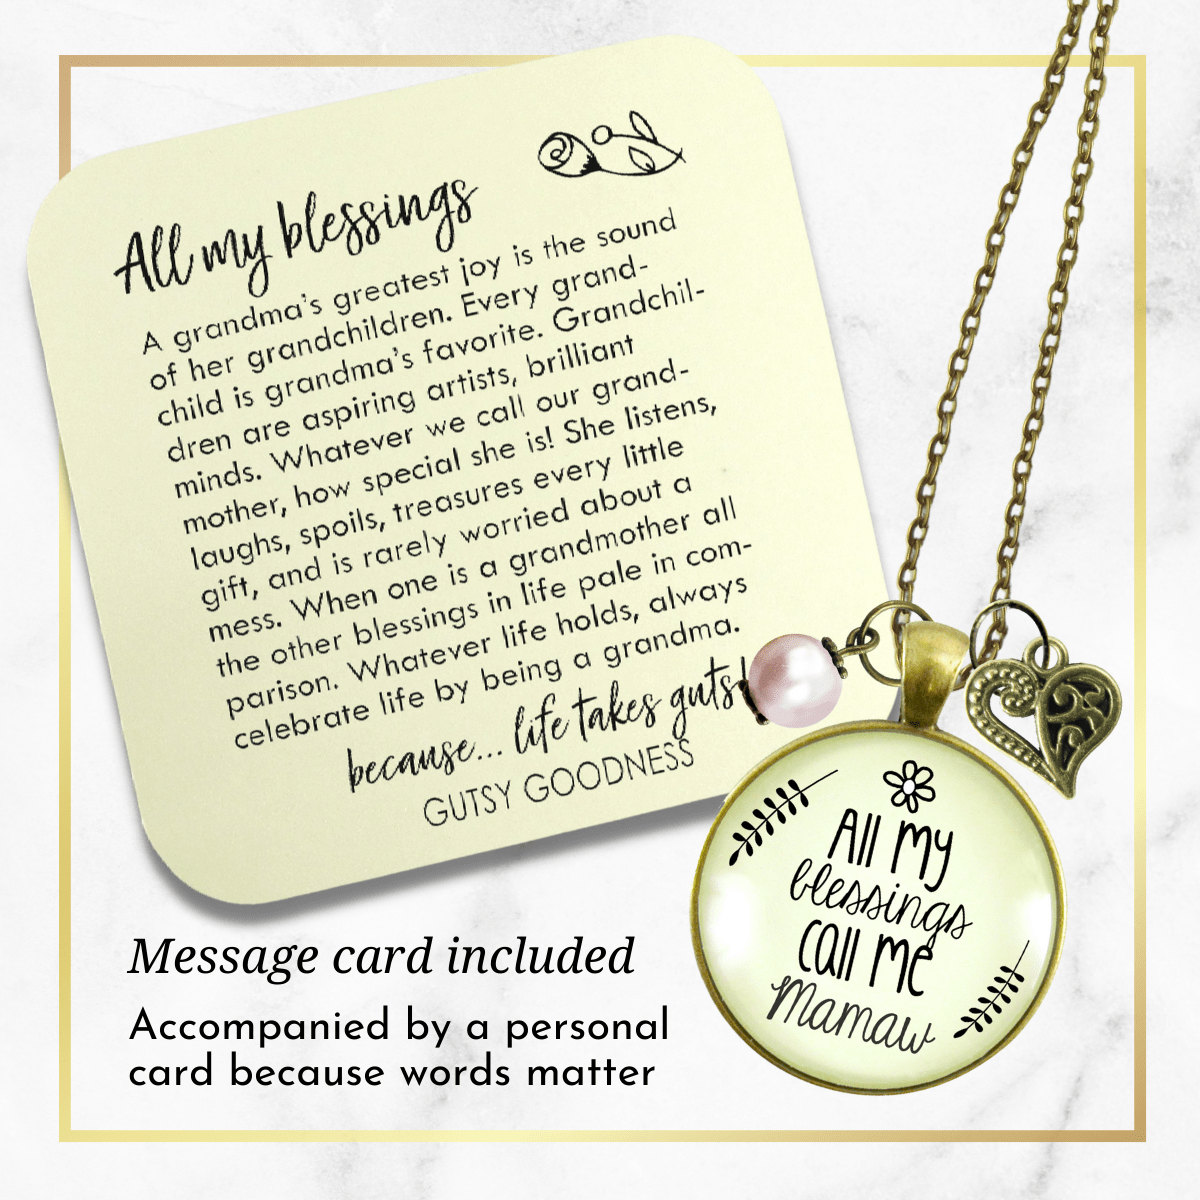 Gutsy Goodness Mamaw Necklace All My Blessings Southern Grandma Womens Family Gift Jewelry - Gutsy Goodness Handmade Jewelry;Mamaw Necklace All My Blessings Southern Grandma Womens Family Gift Jewelry - Gutsy Goodness Handmade Jewelry Gifts